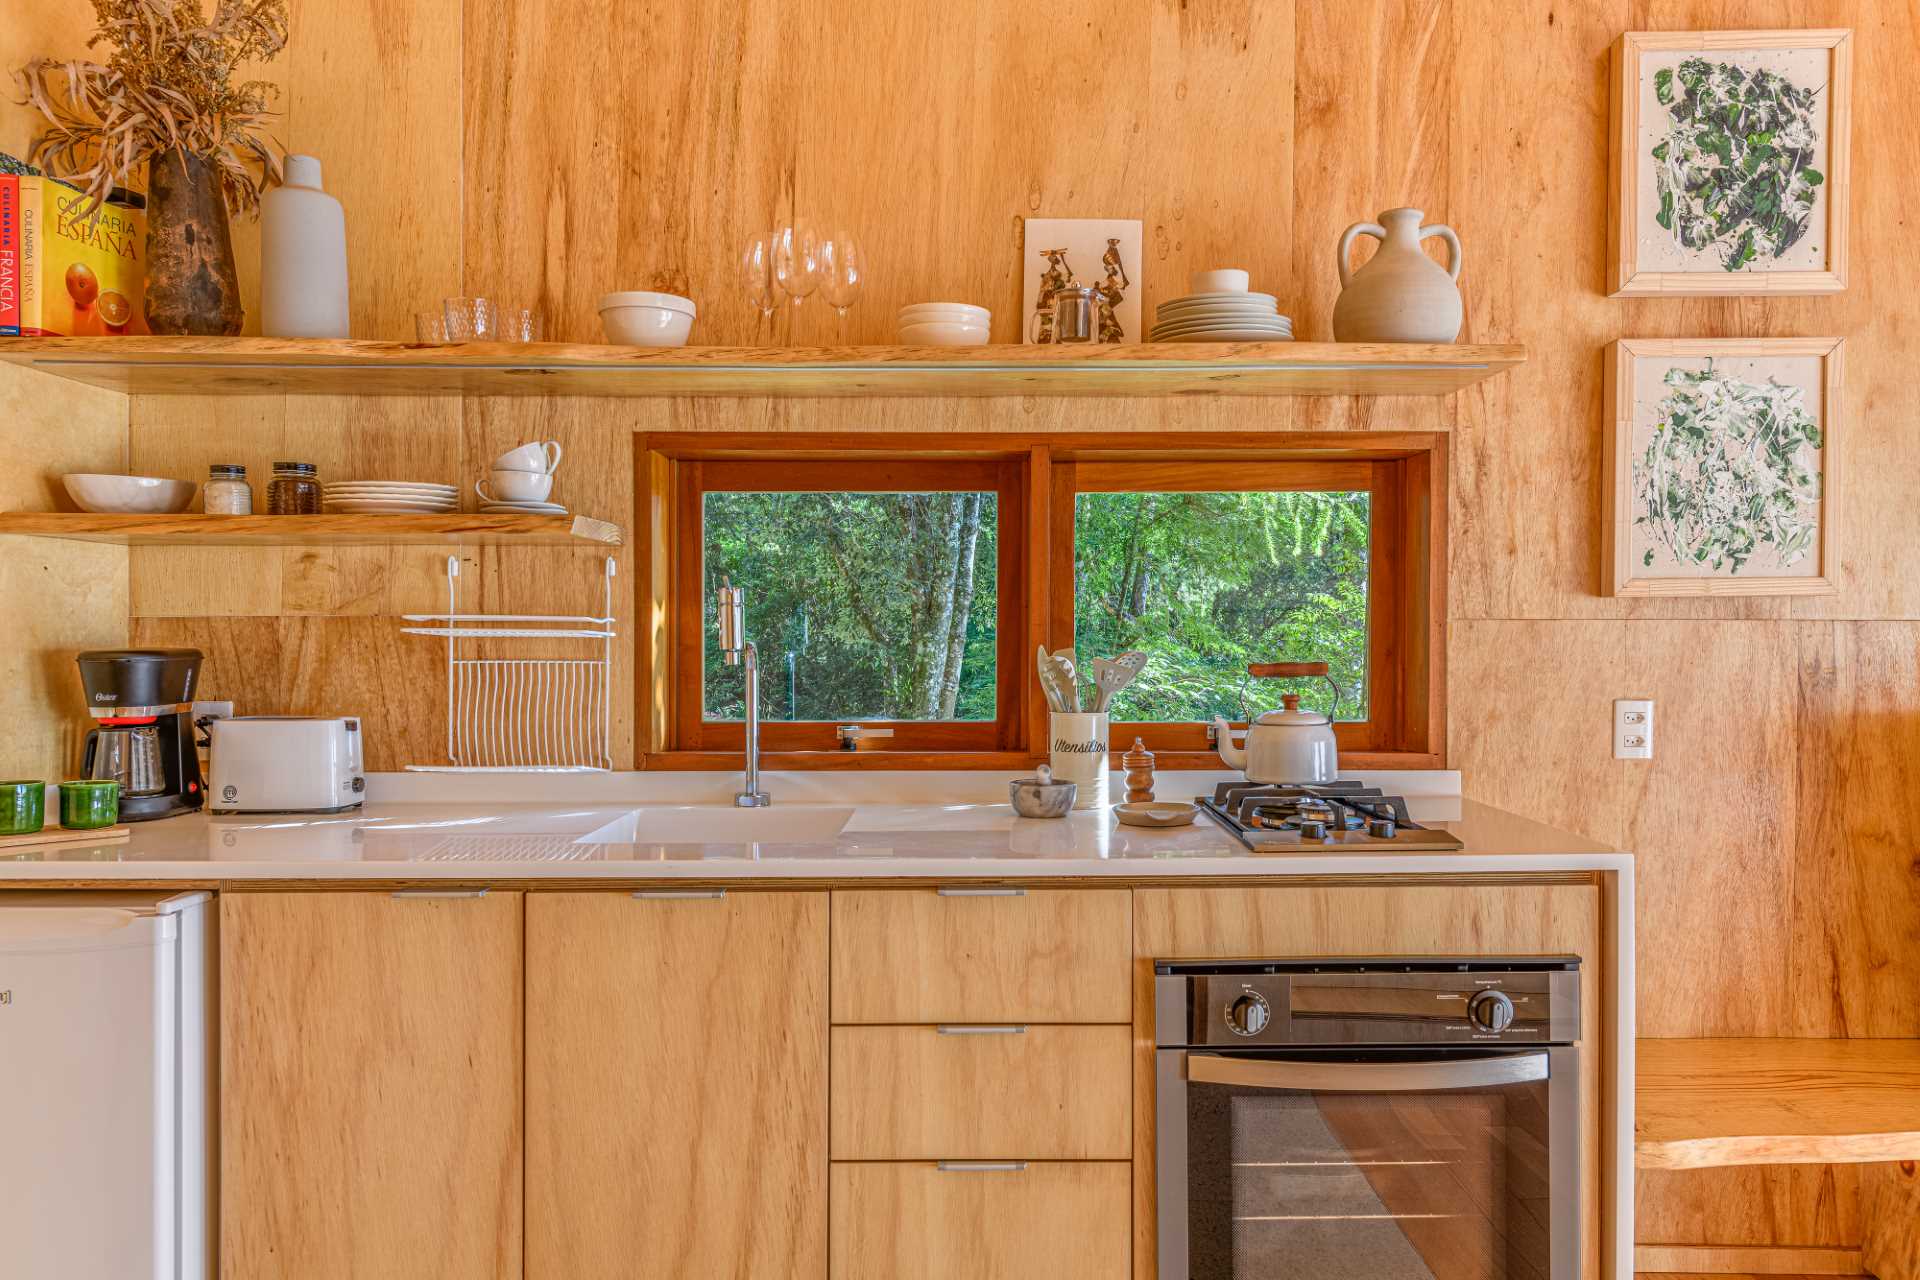 A modern tree house kitchen that includes wood cabinets, a white countertop, and floating shelves that provide additional storage.